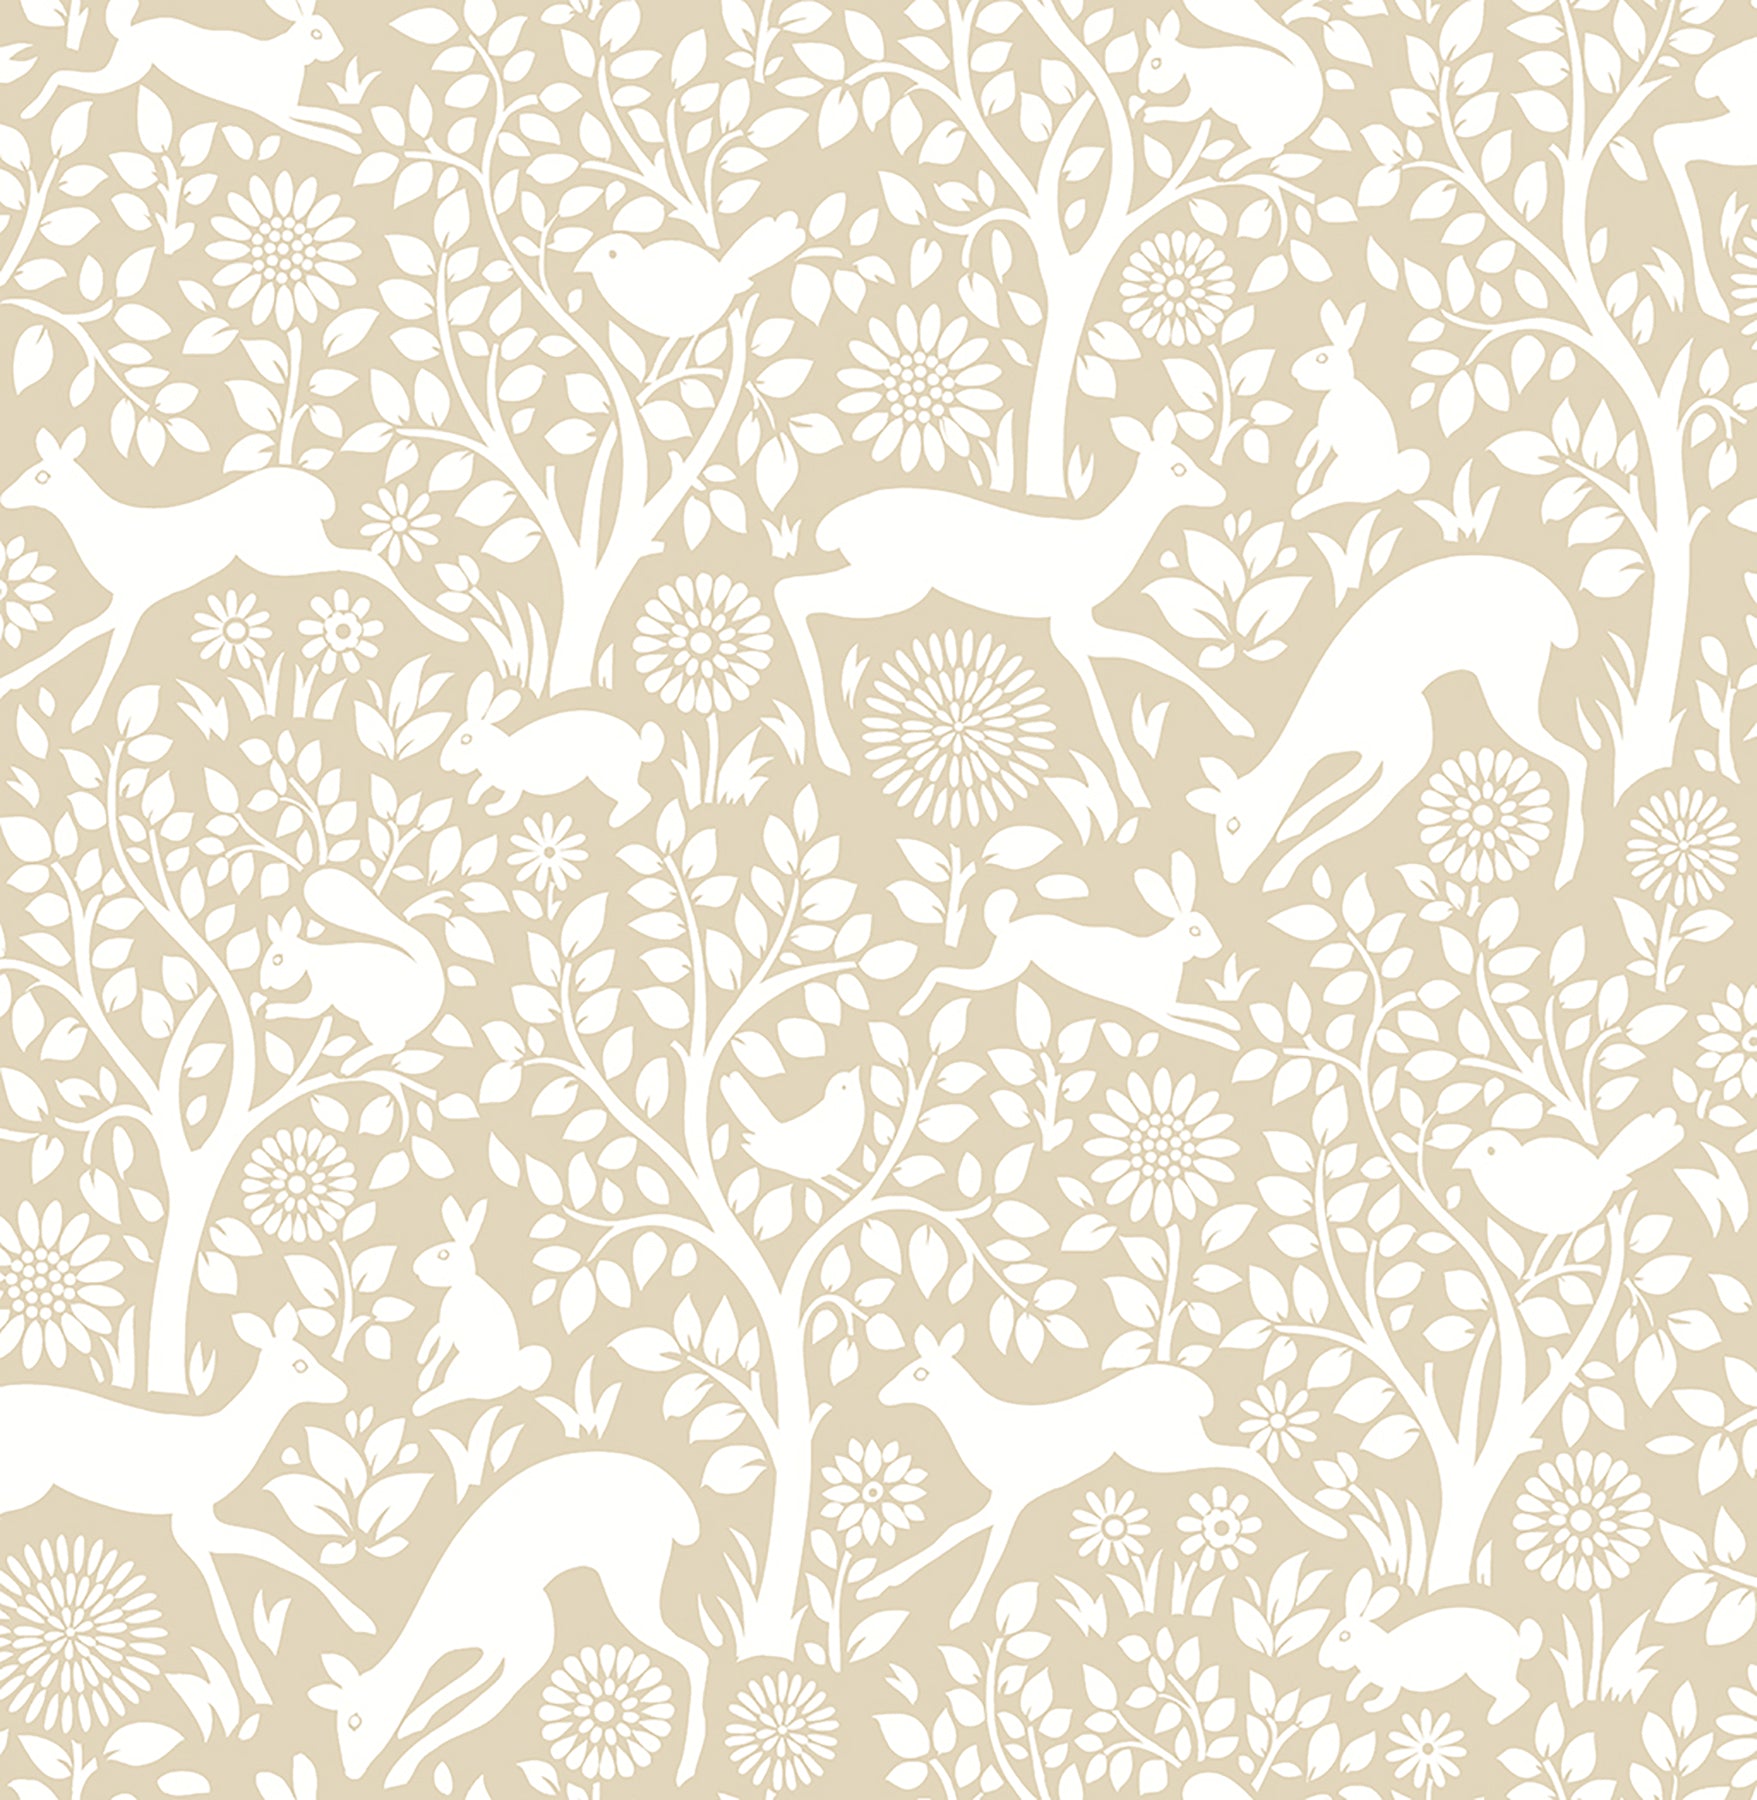 Save on 2702-22733 Meadow Taupe Animals by A-Street Prints Wallpaper